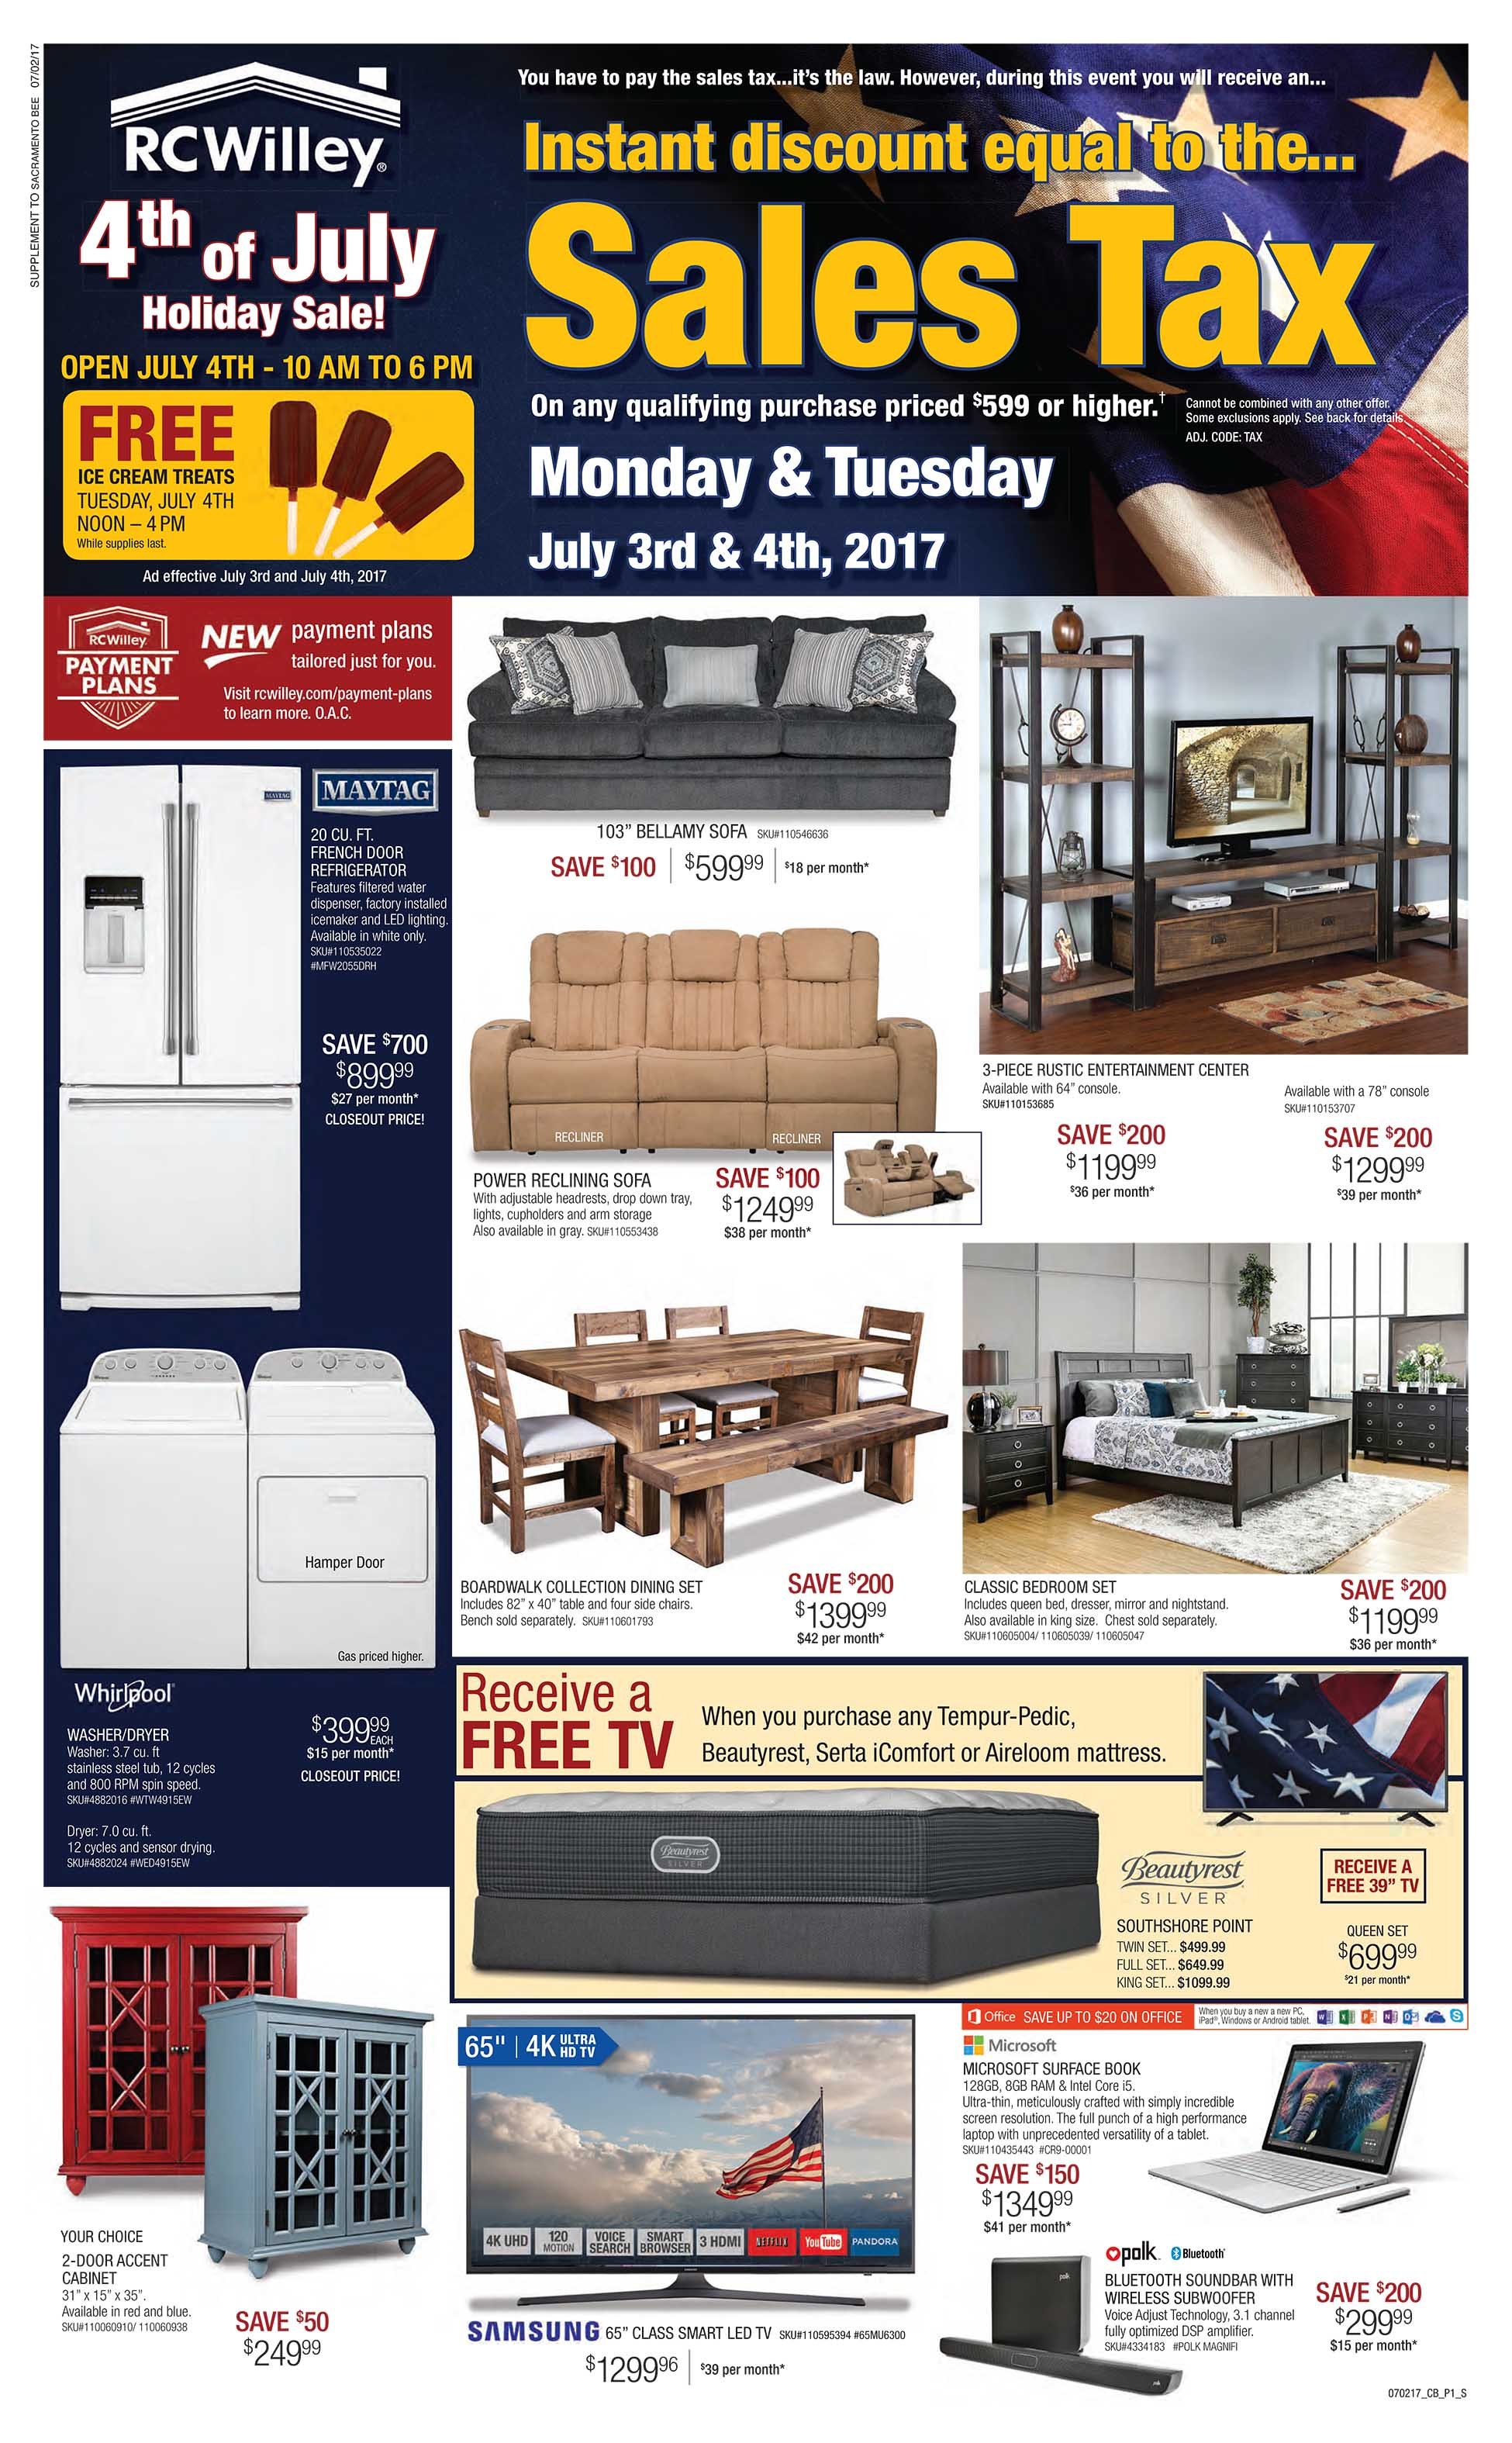 4th of July Sale! RC Willey